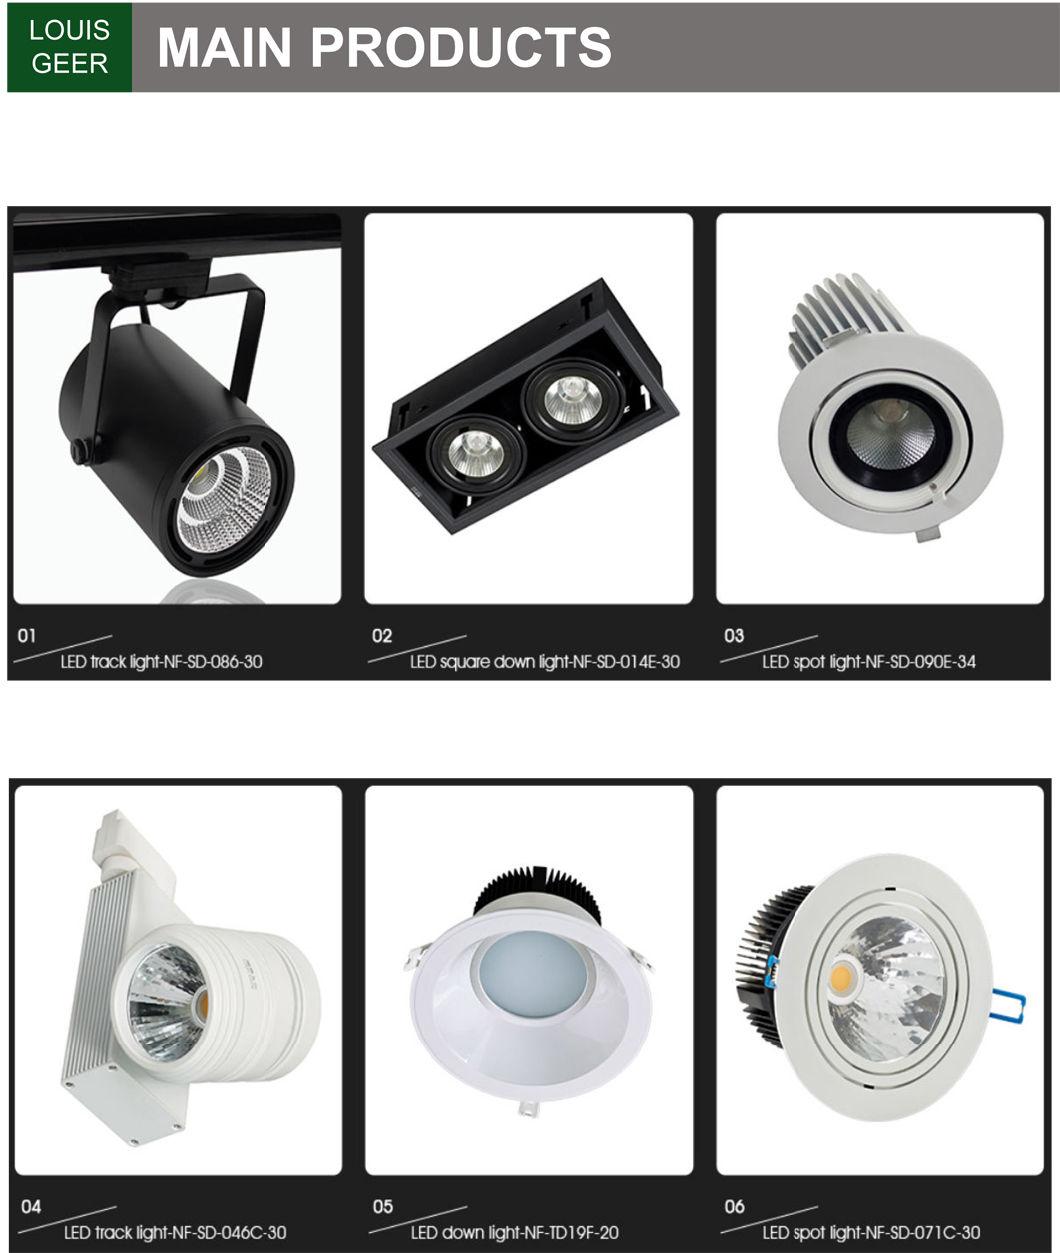 Focal Length Adjustable Suitable LED Track Light for Fashion Lighting and Interior Decoration